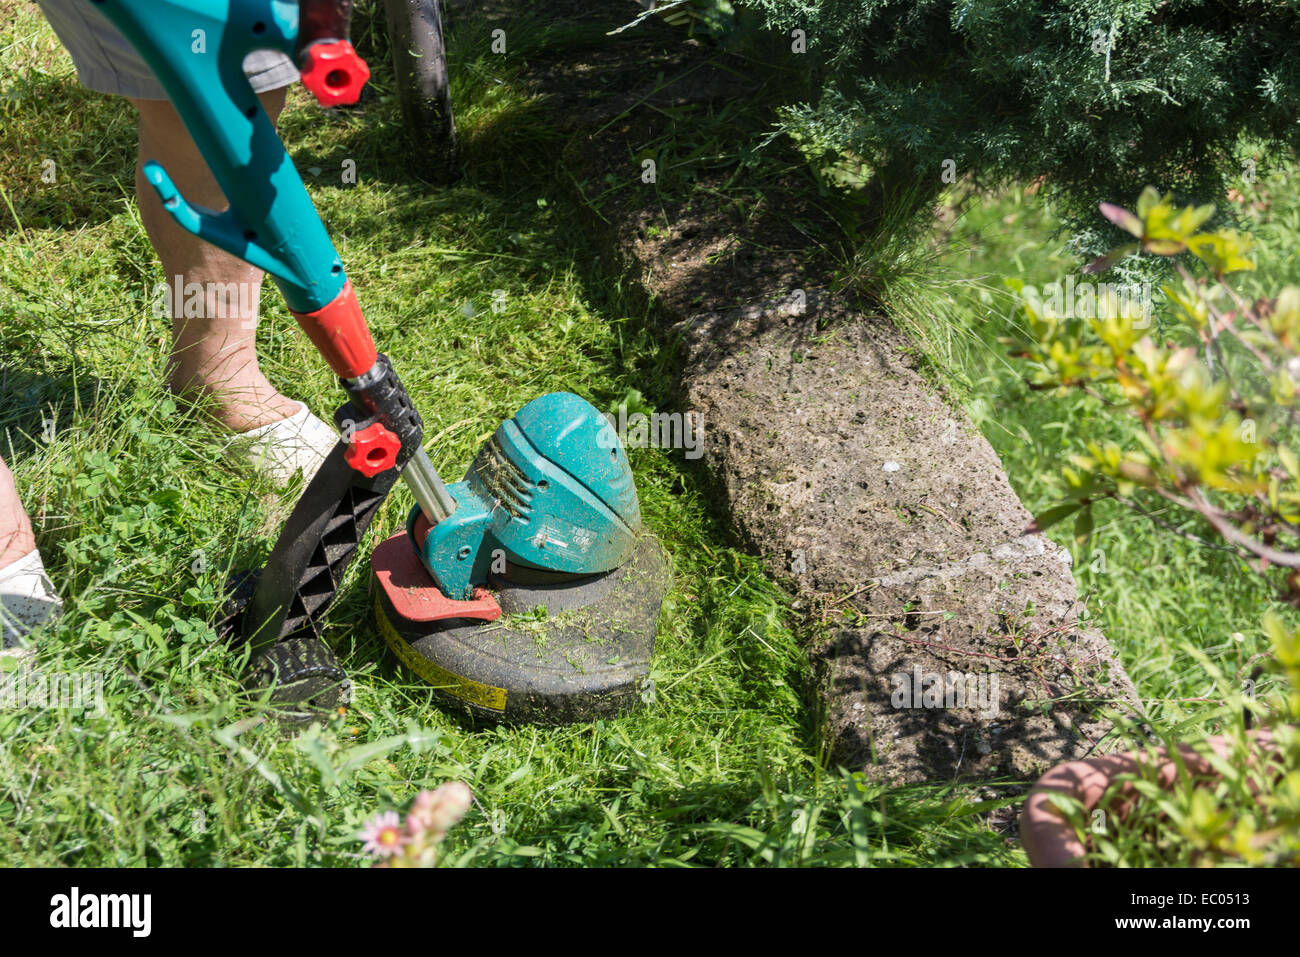 Man busy and concentrated trimming grass in the garden with brush cutter Stock Photo